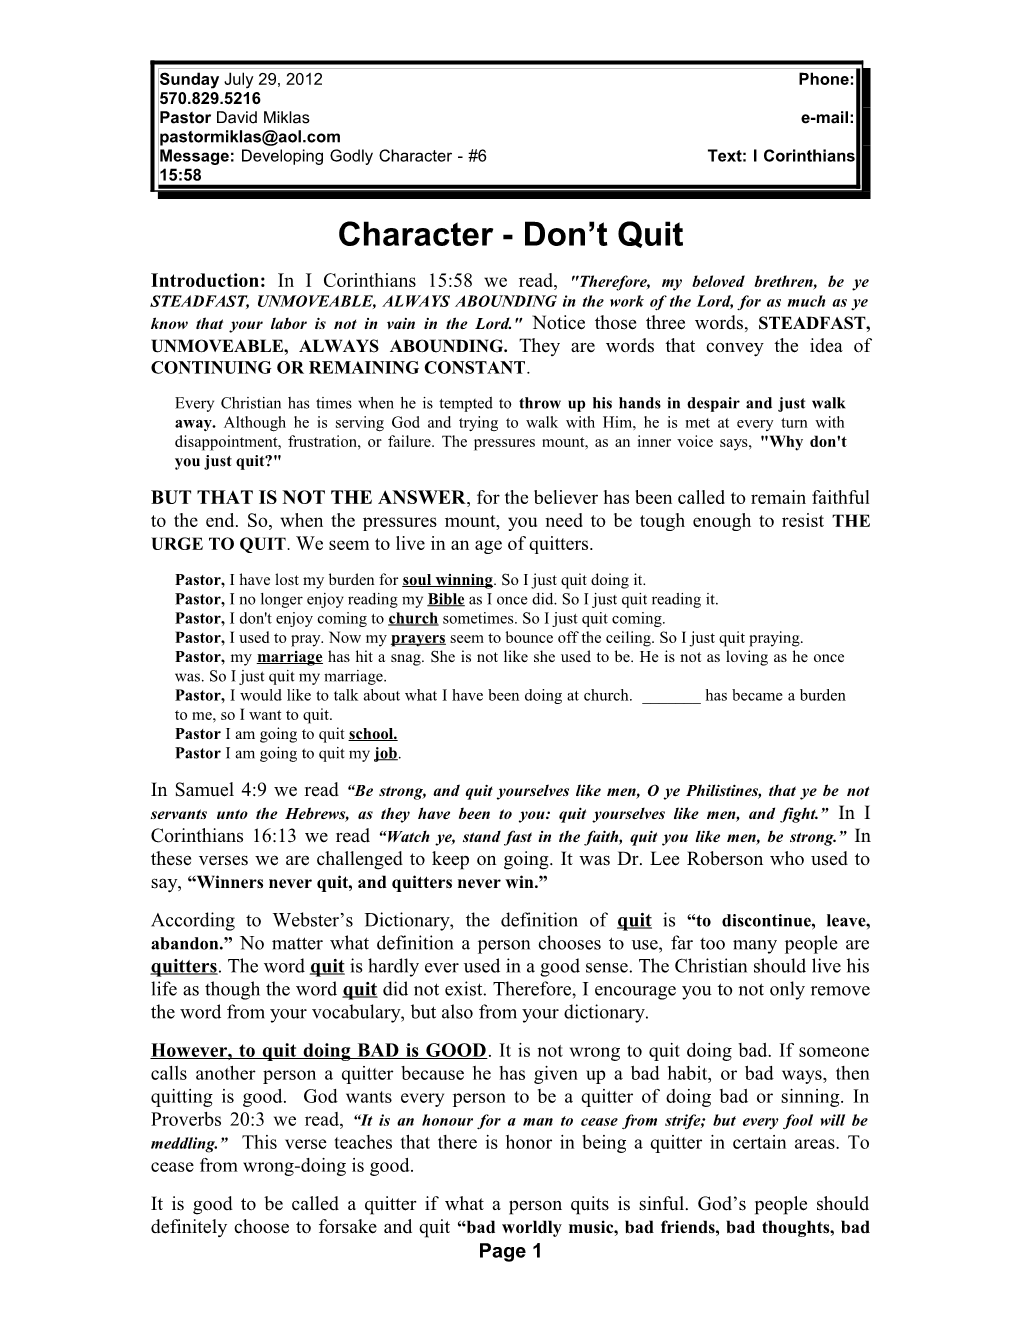 Character - Don't Quit